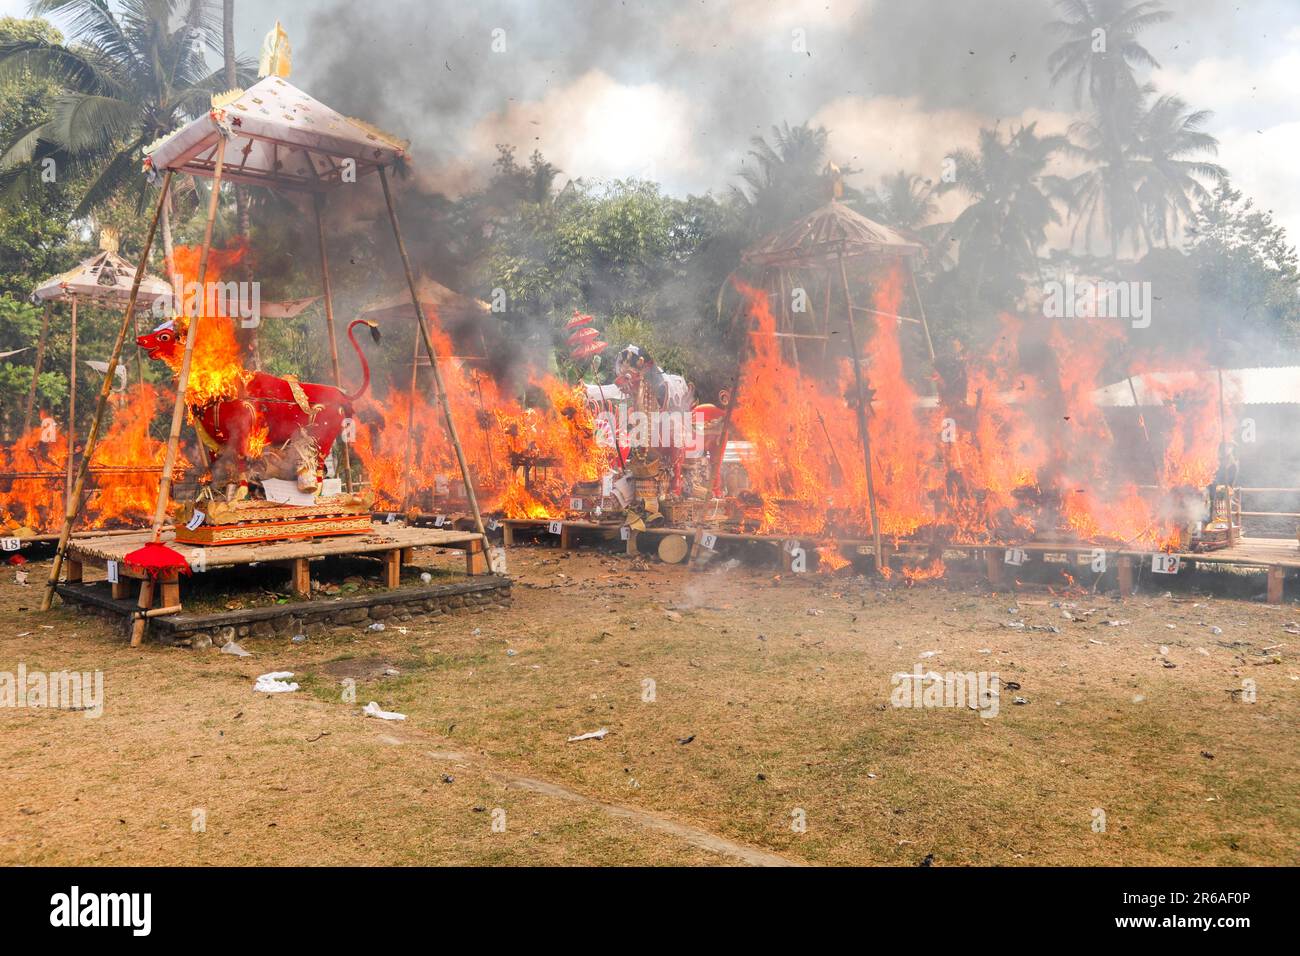 The sarcophagi containing the bones or bodies of the deceased are burnt during the cremation ceremony (Ngaben), Ubud, Bali, Indonesia Stock Photo